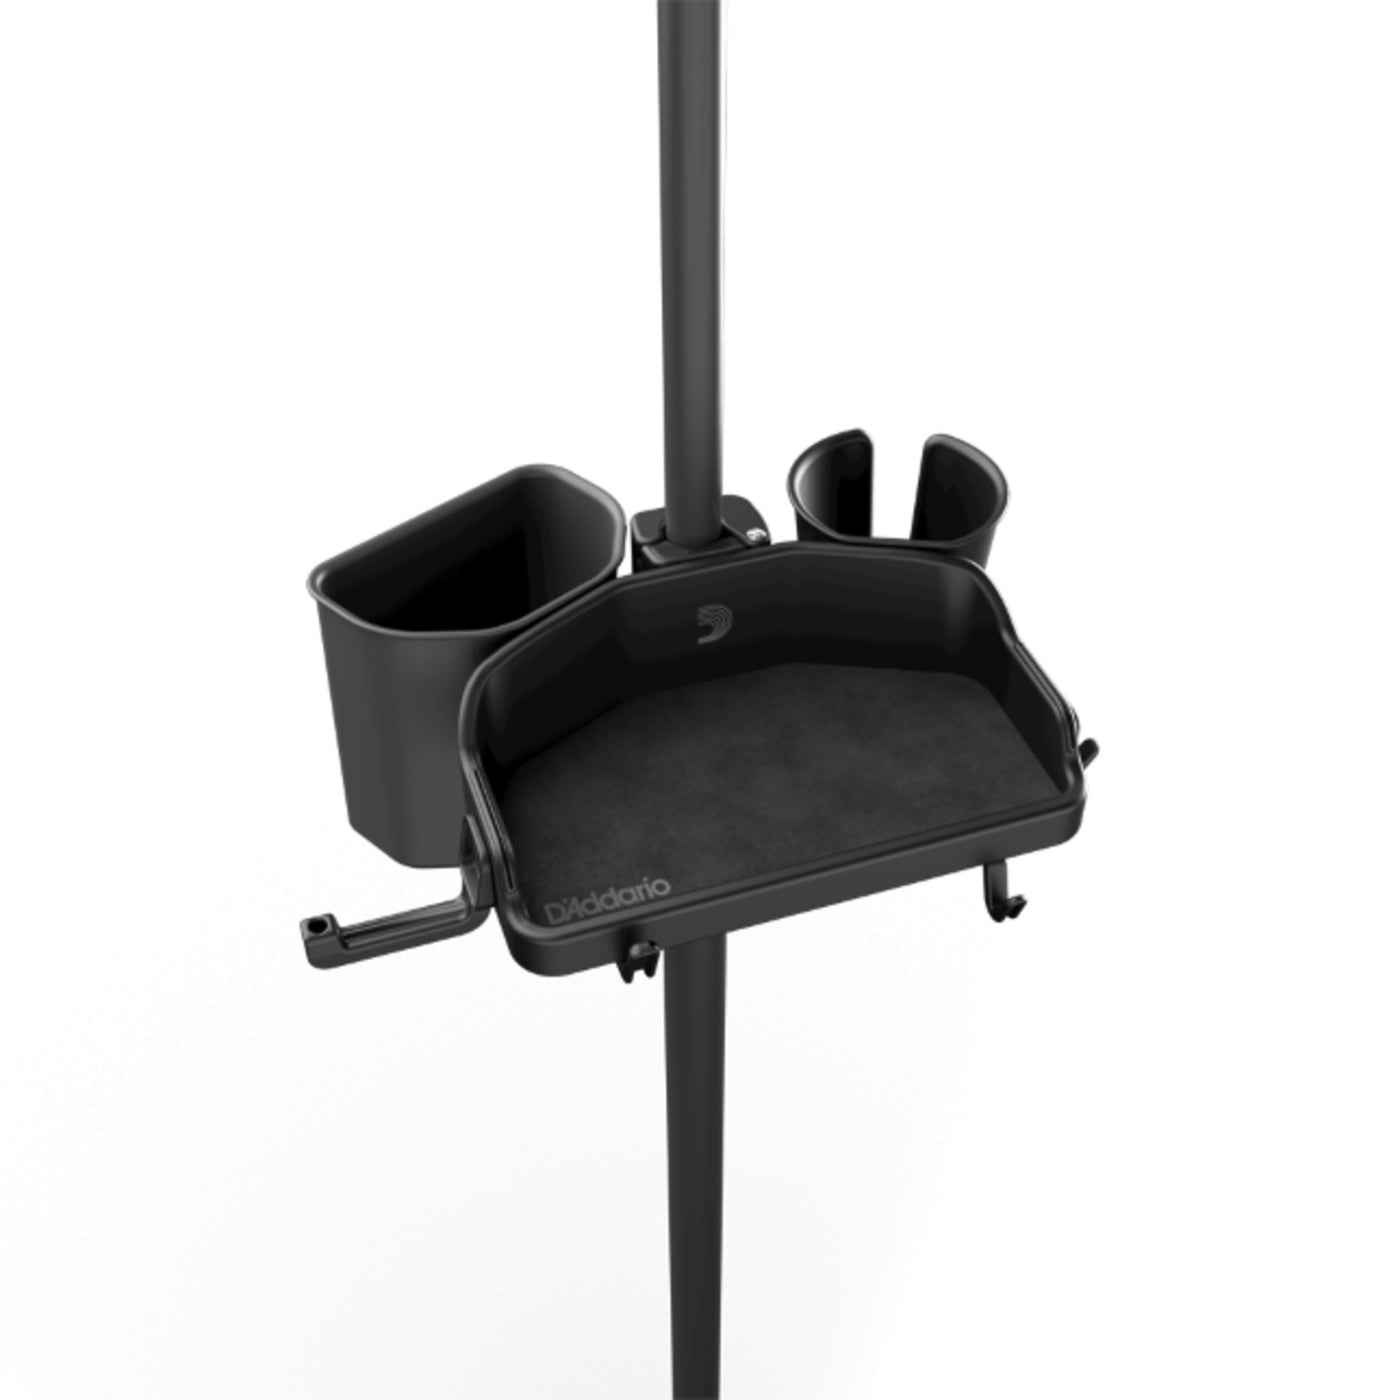 D'Addario Mic Stand Accessory System - Gear Tray (PW-MSAST-01)